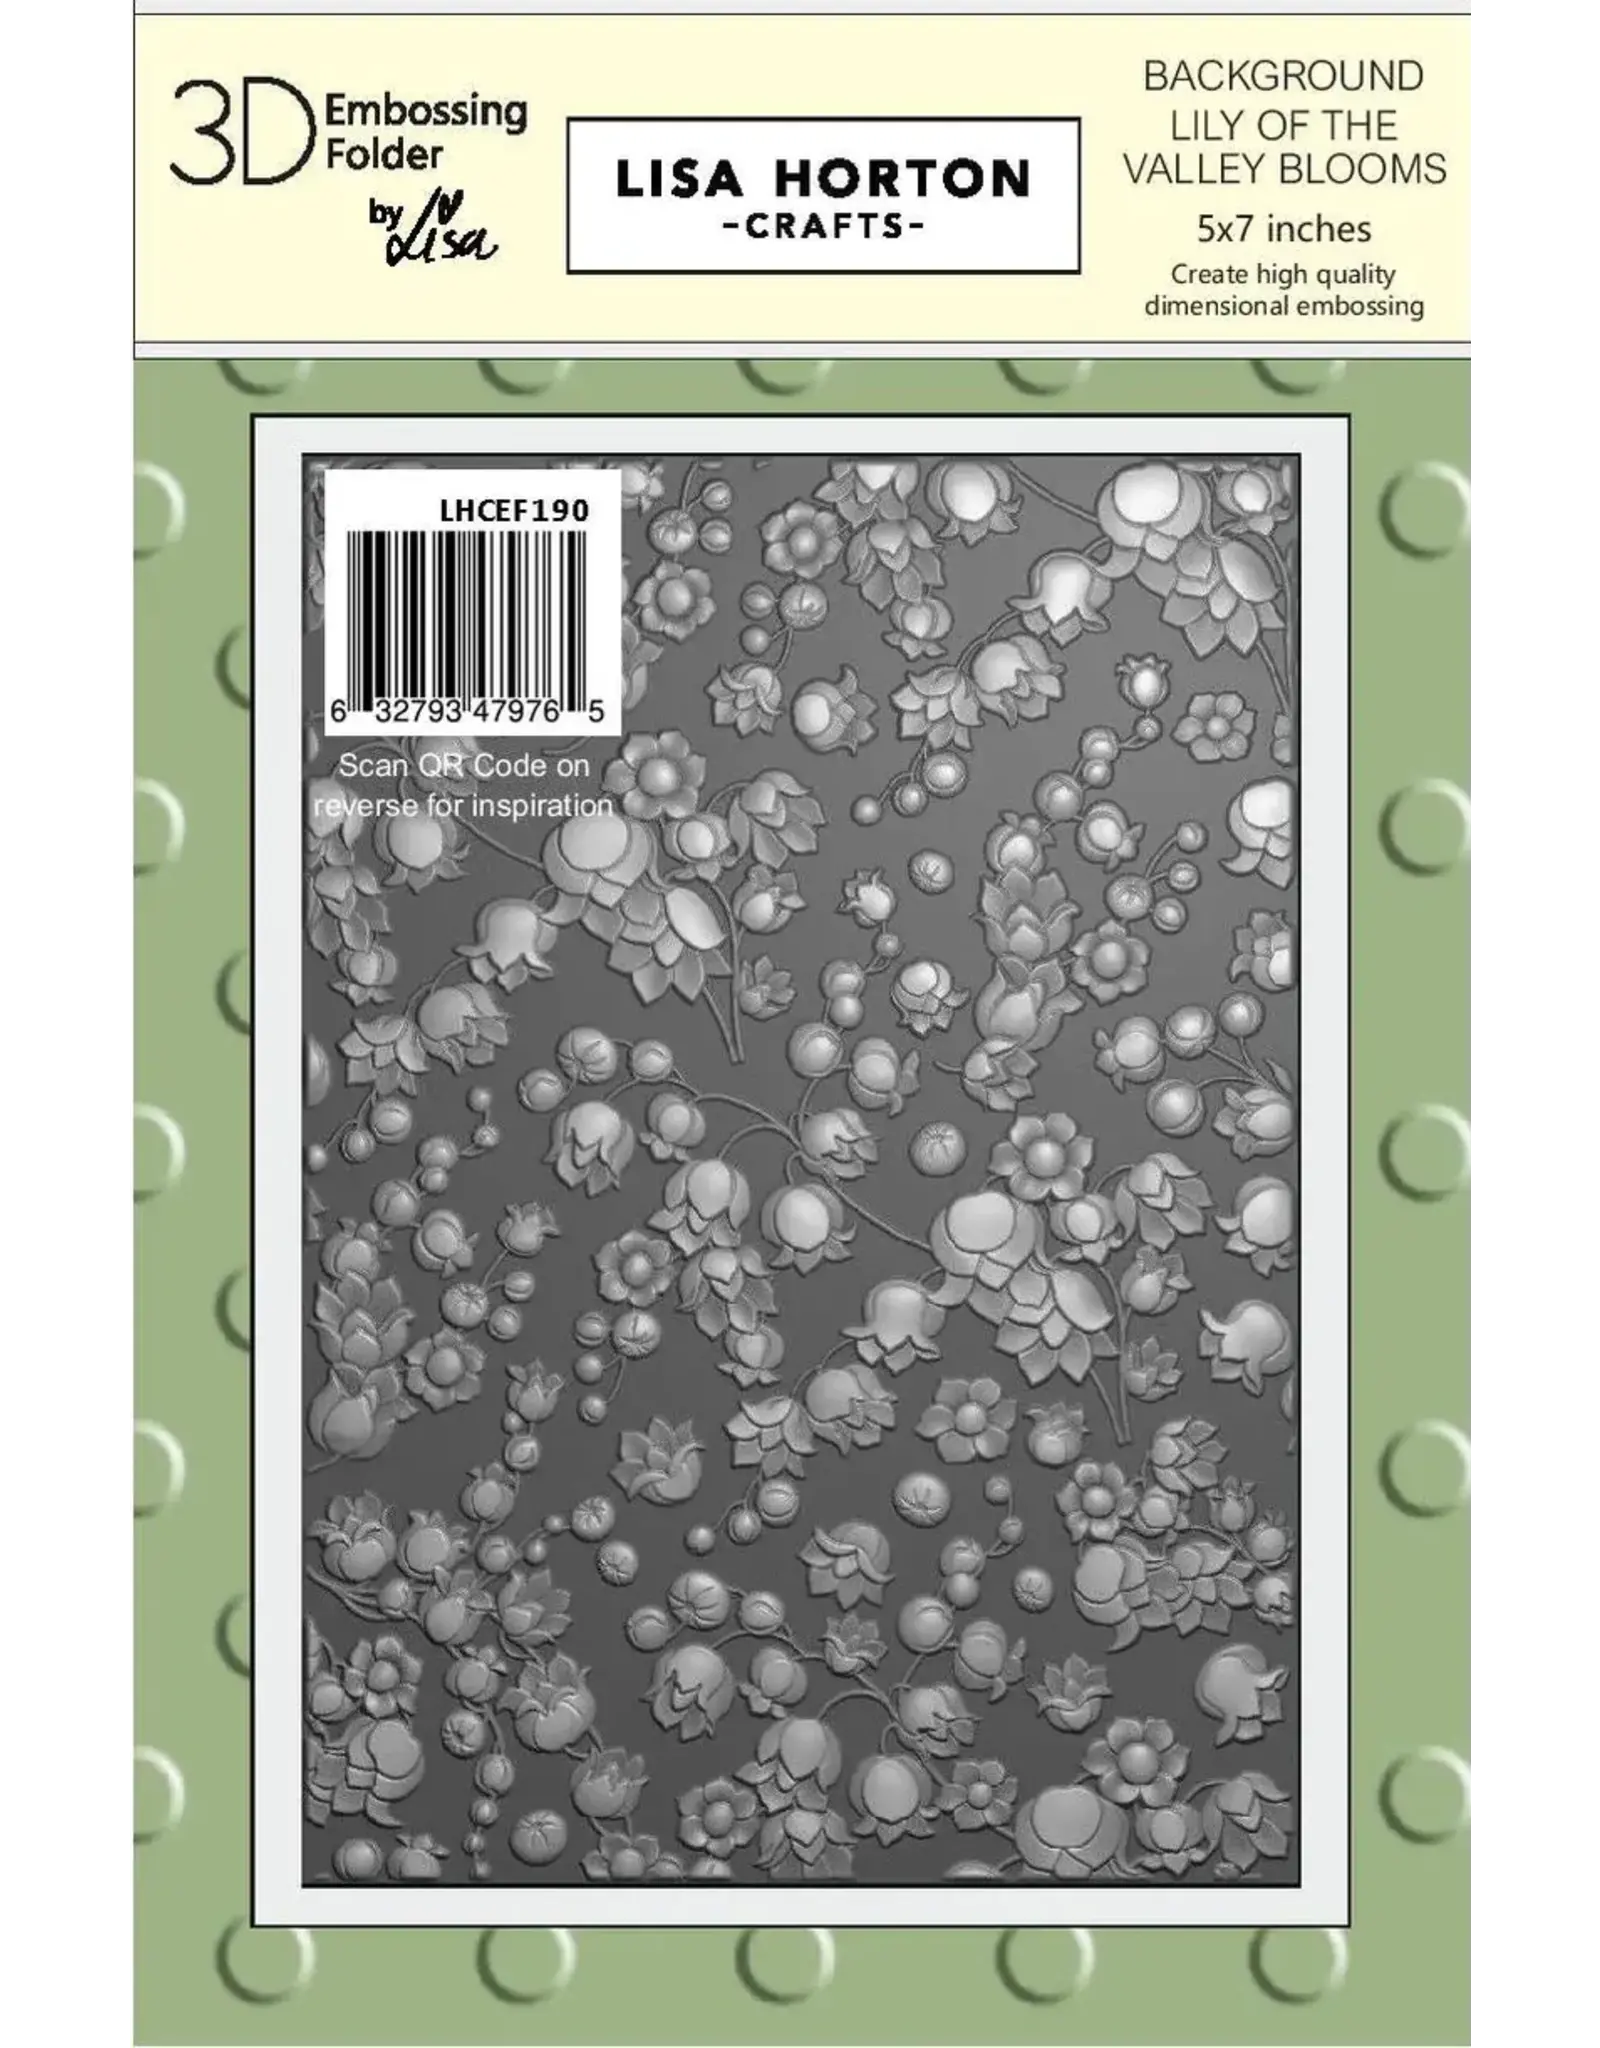 LISA HORTON CRAFTS LISA HORTON CRAFTS BACKGROUND LILY OF THE VALLEY BLOOMS 5x7 3D EMBOSSING FOLDER